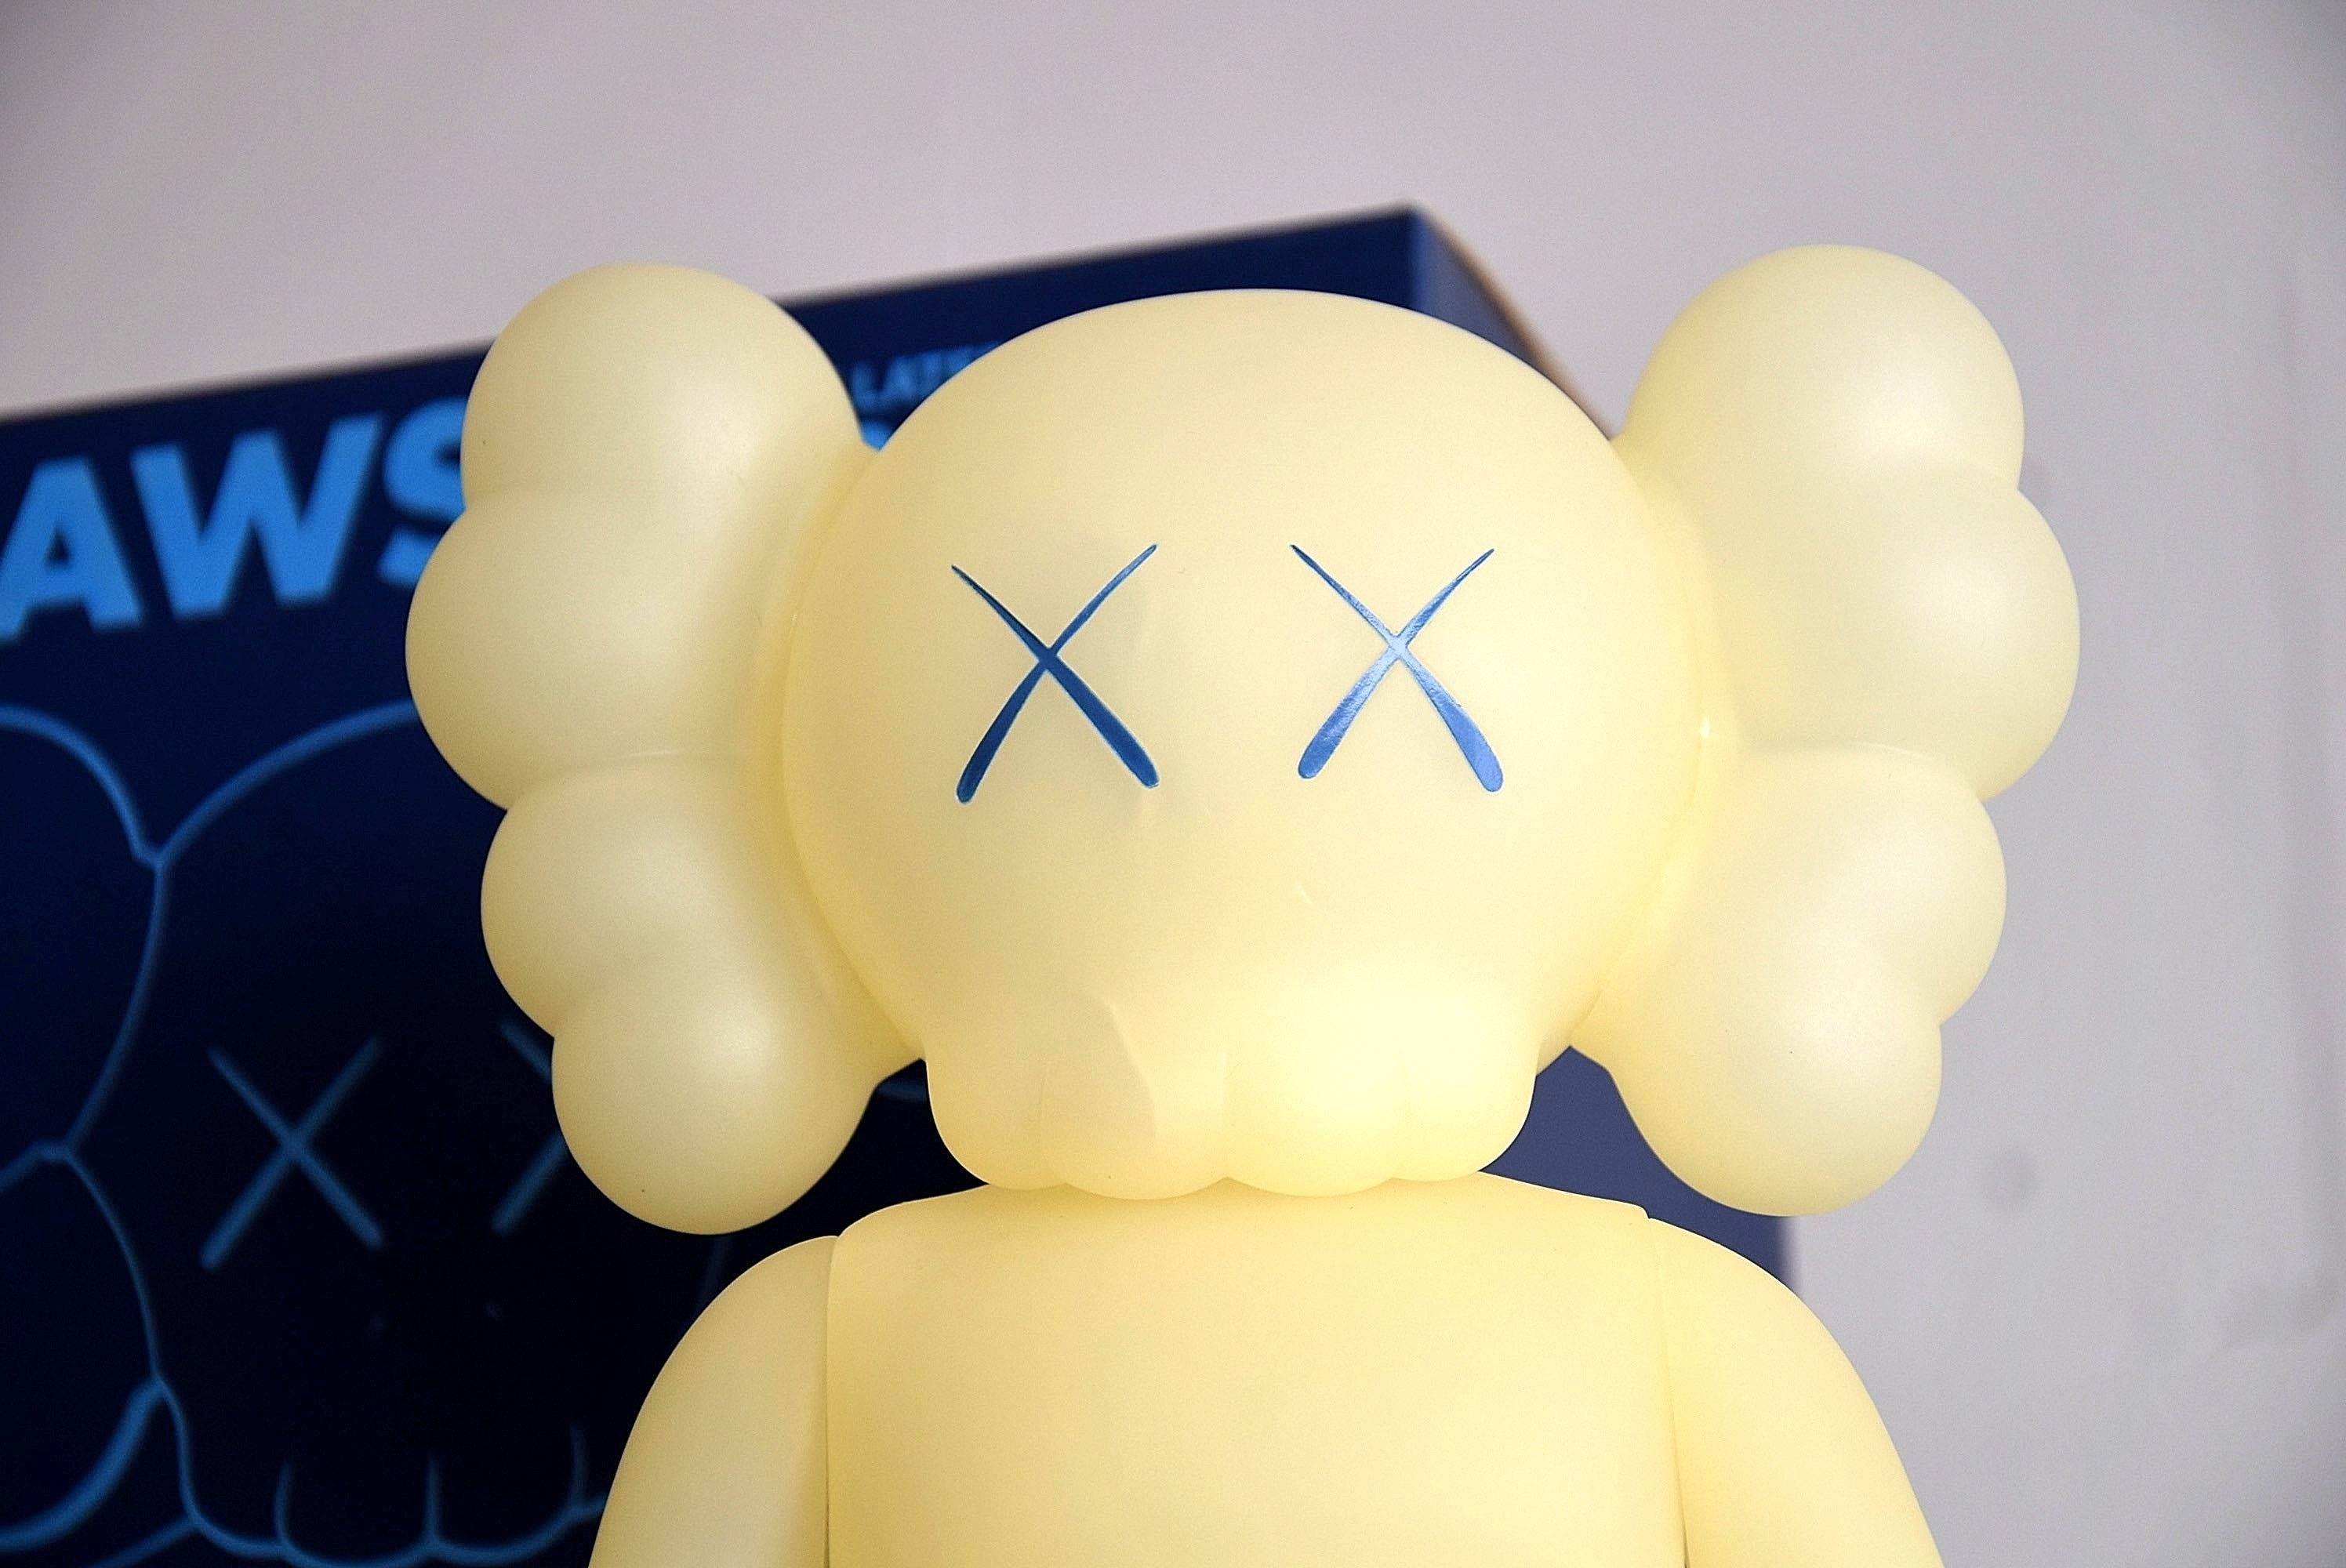 Mint big & early vinyl figure by Kaws. Kaws companion (5 years later) created by Kaws in 2004. 

Produced by Medicom, Japan in 2004 in an edition of 500. Accompanied by the original box als in perfect condition.

Companion has not been exposed